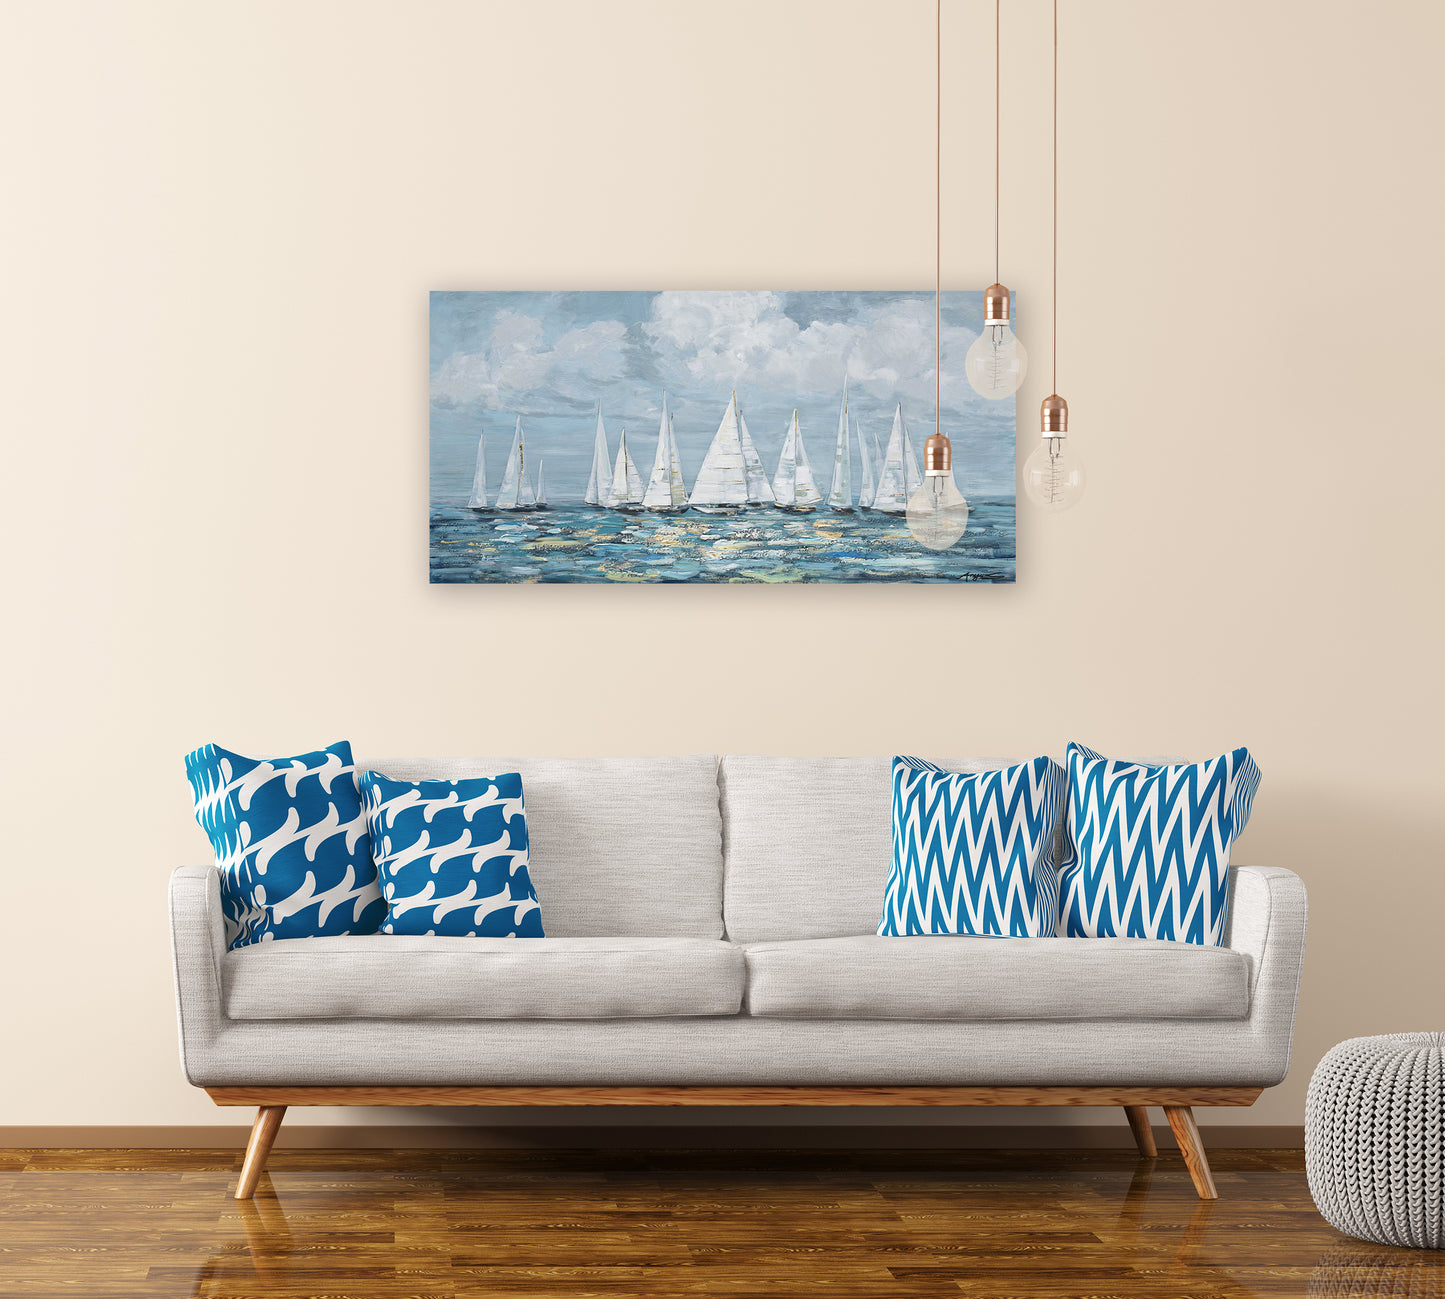 Sailing For A Long Journey Oil Painting on Wrapped Canvas. wall art, canvas artwork for living room, bedroom, office